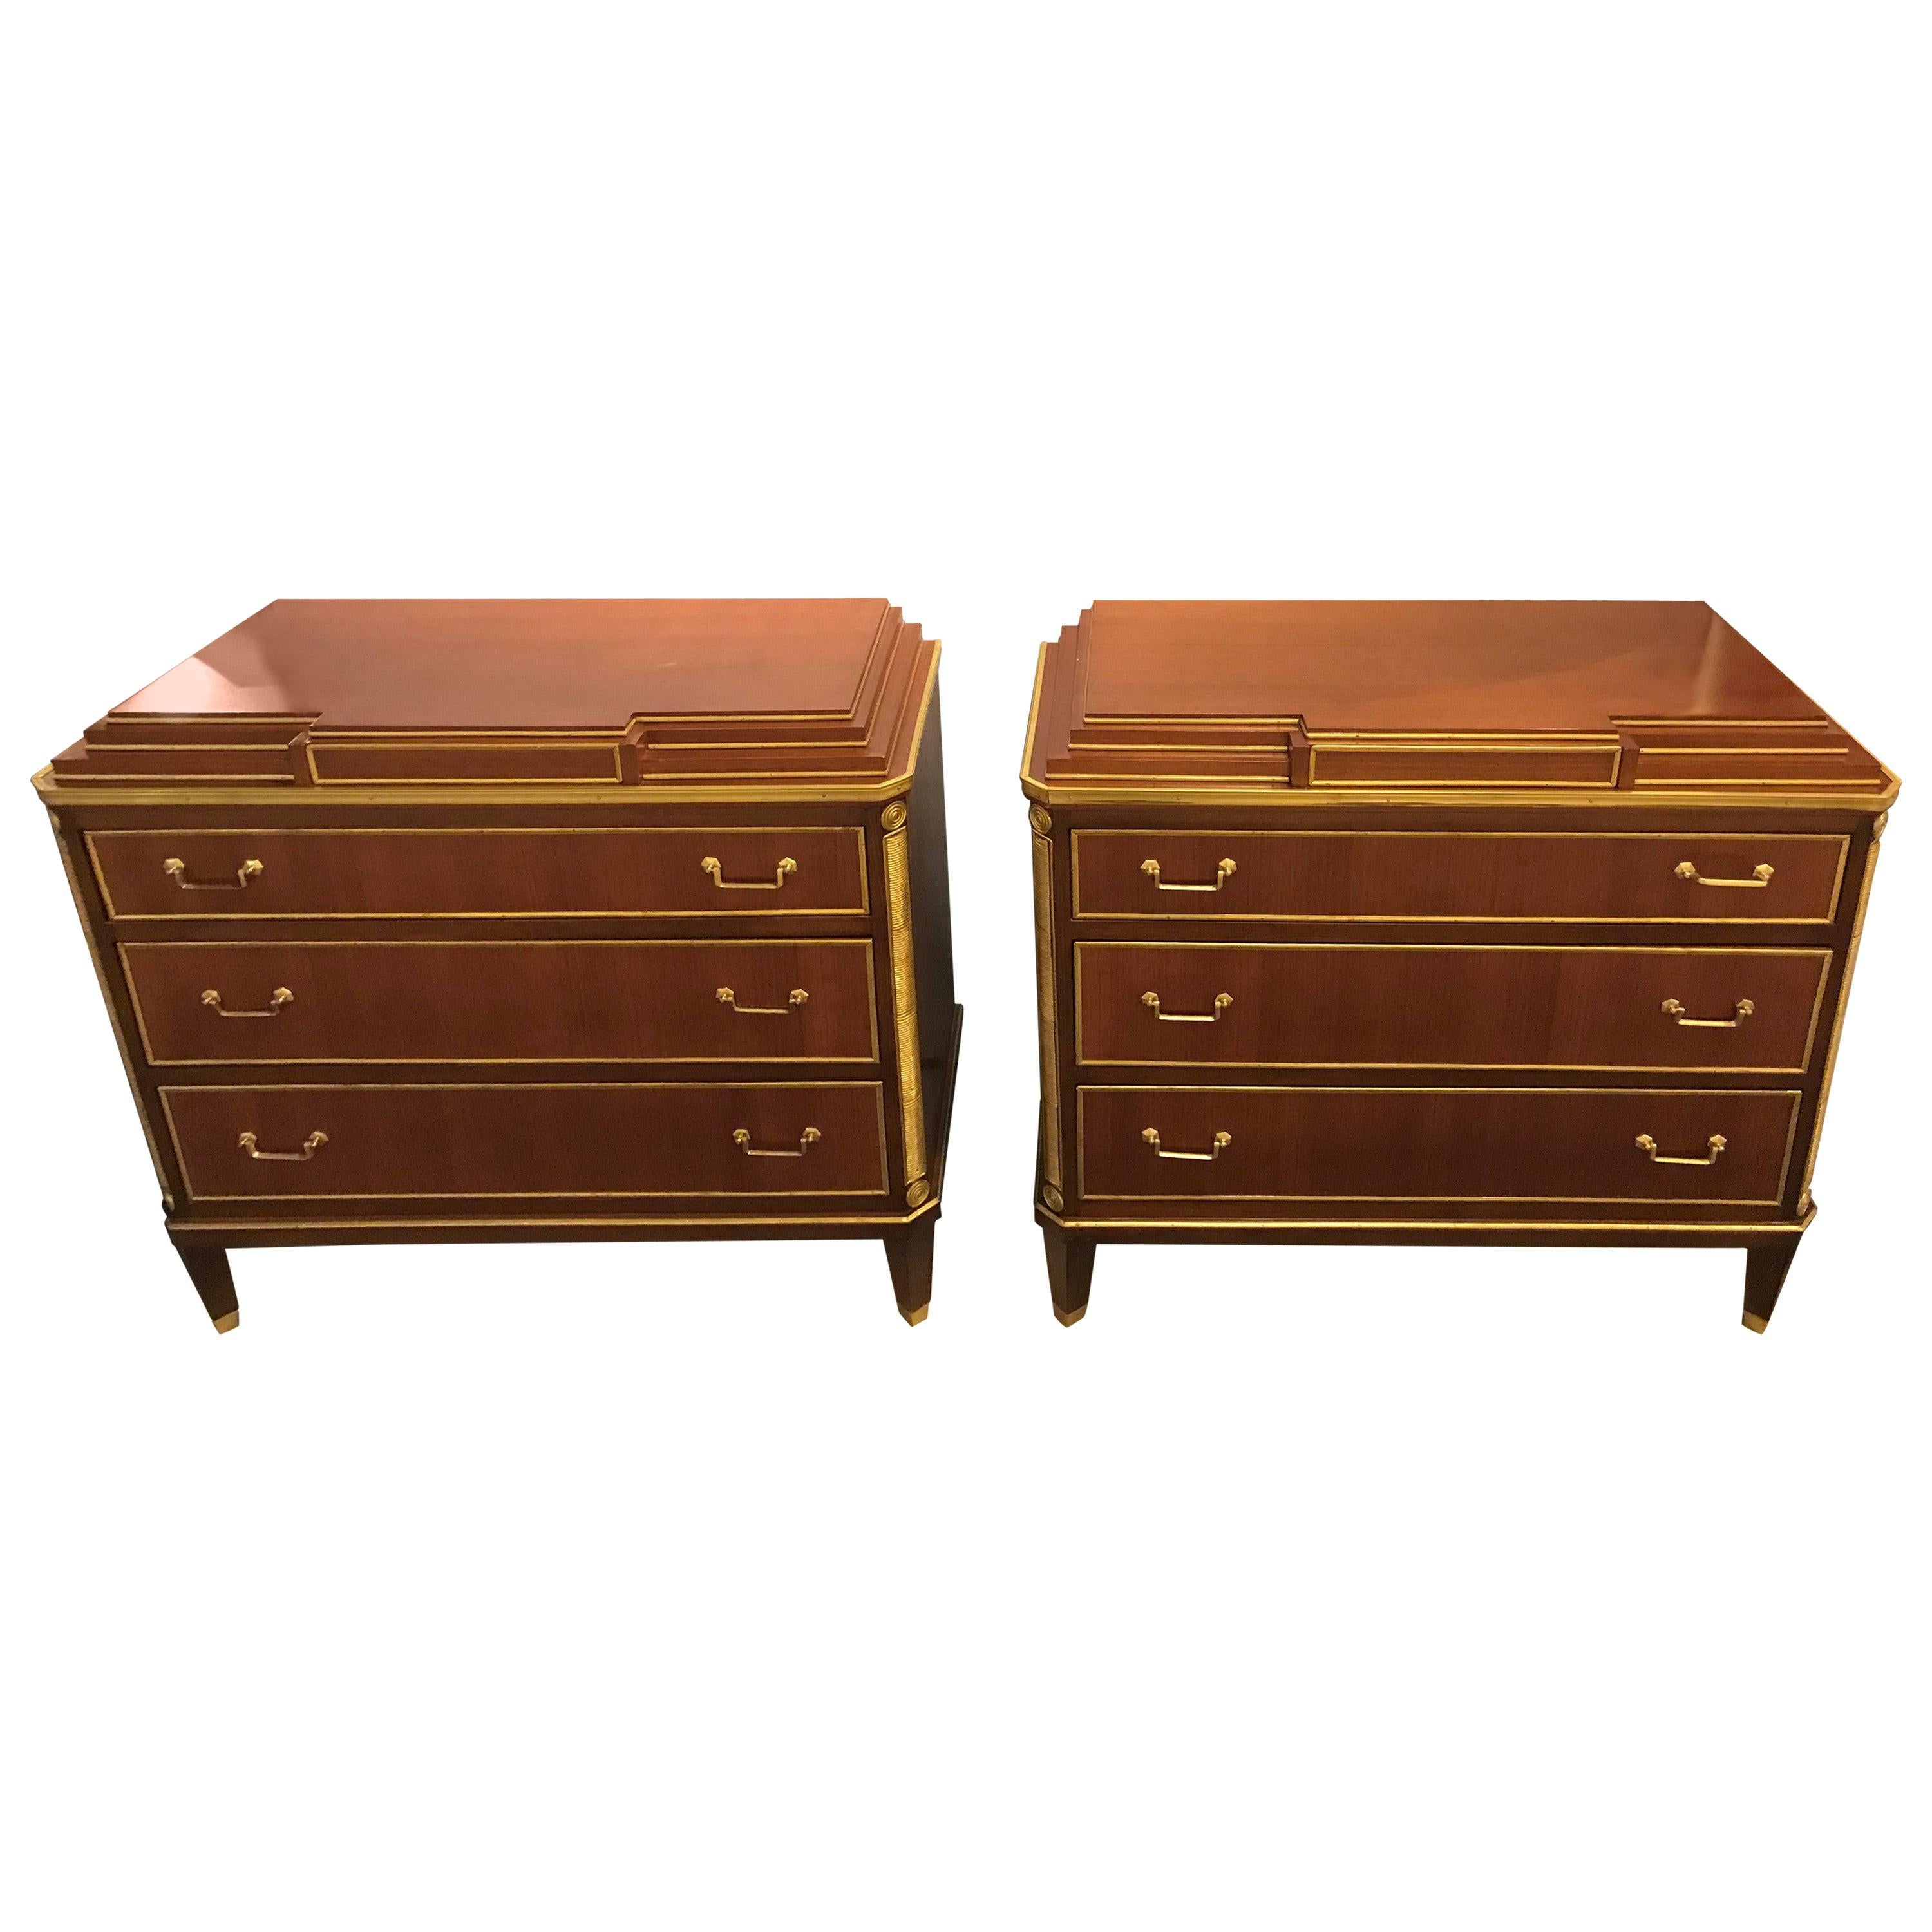 Mahogany Double Step Up Russian Neoclassical Style Commodes / Nightstands, Pair